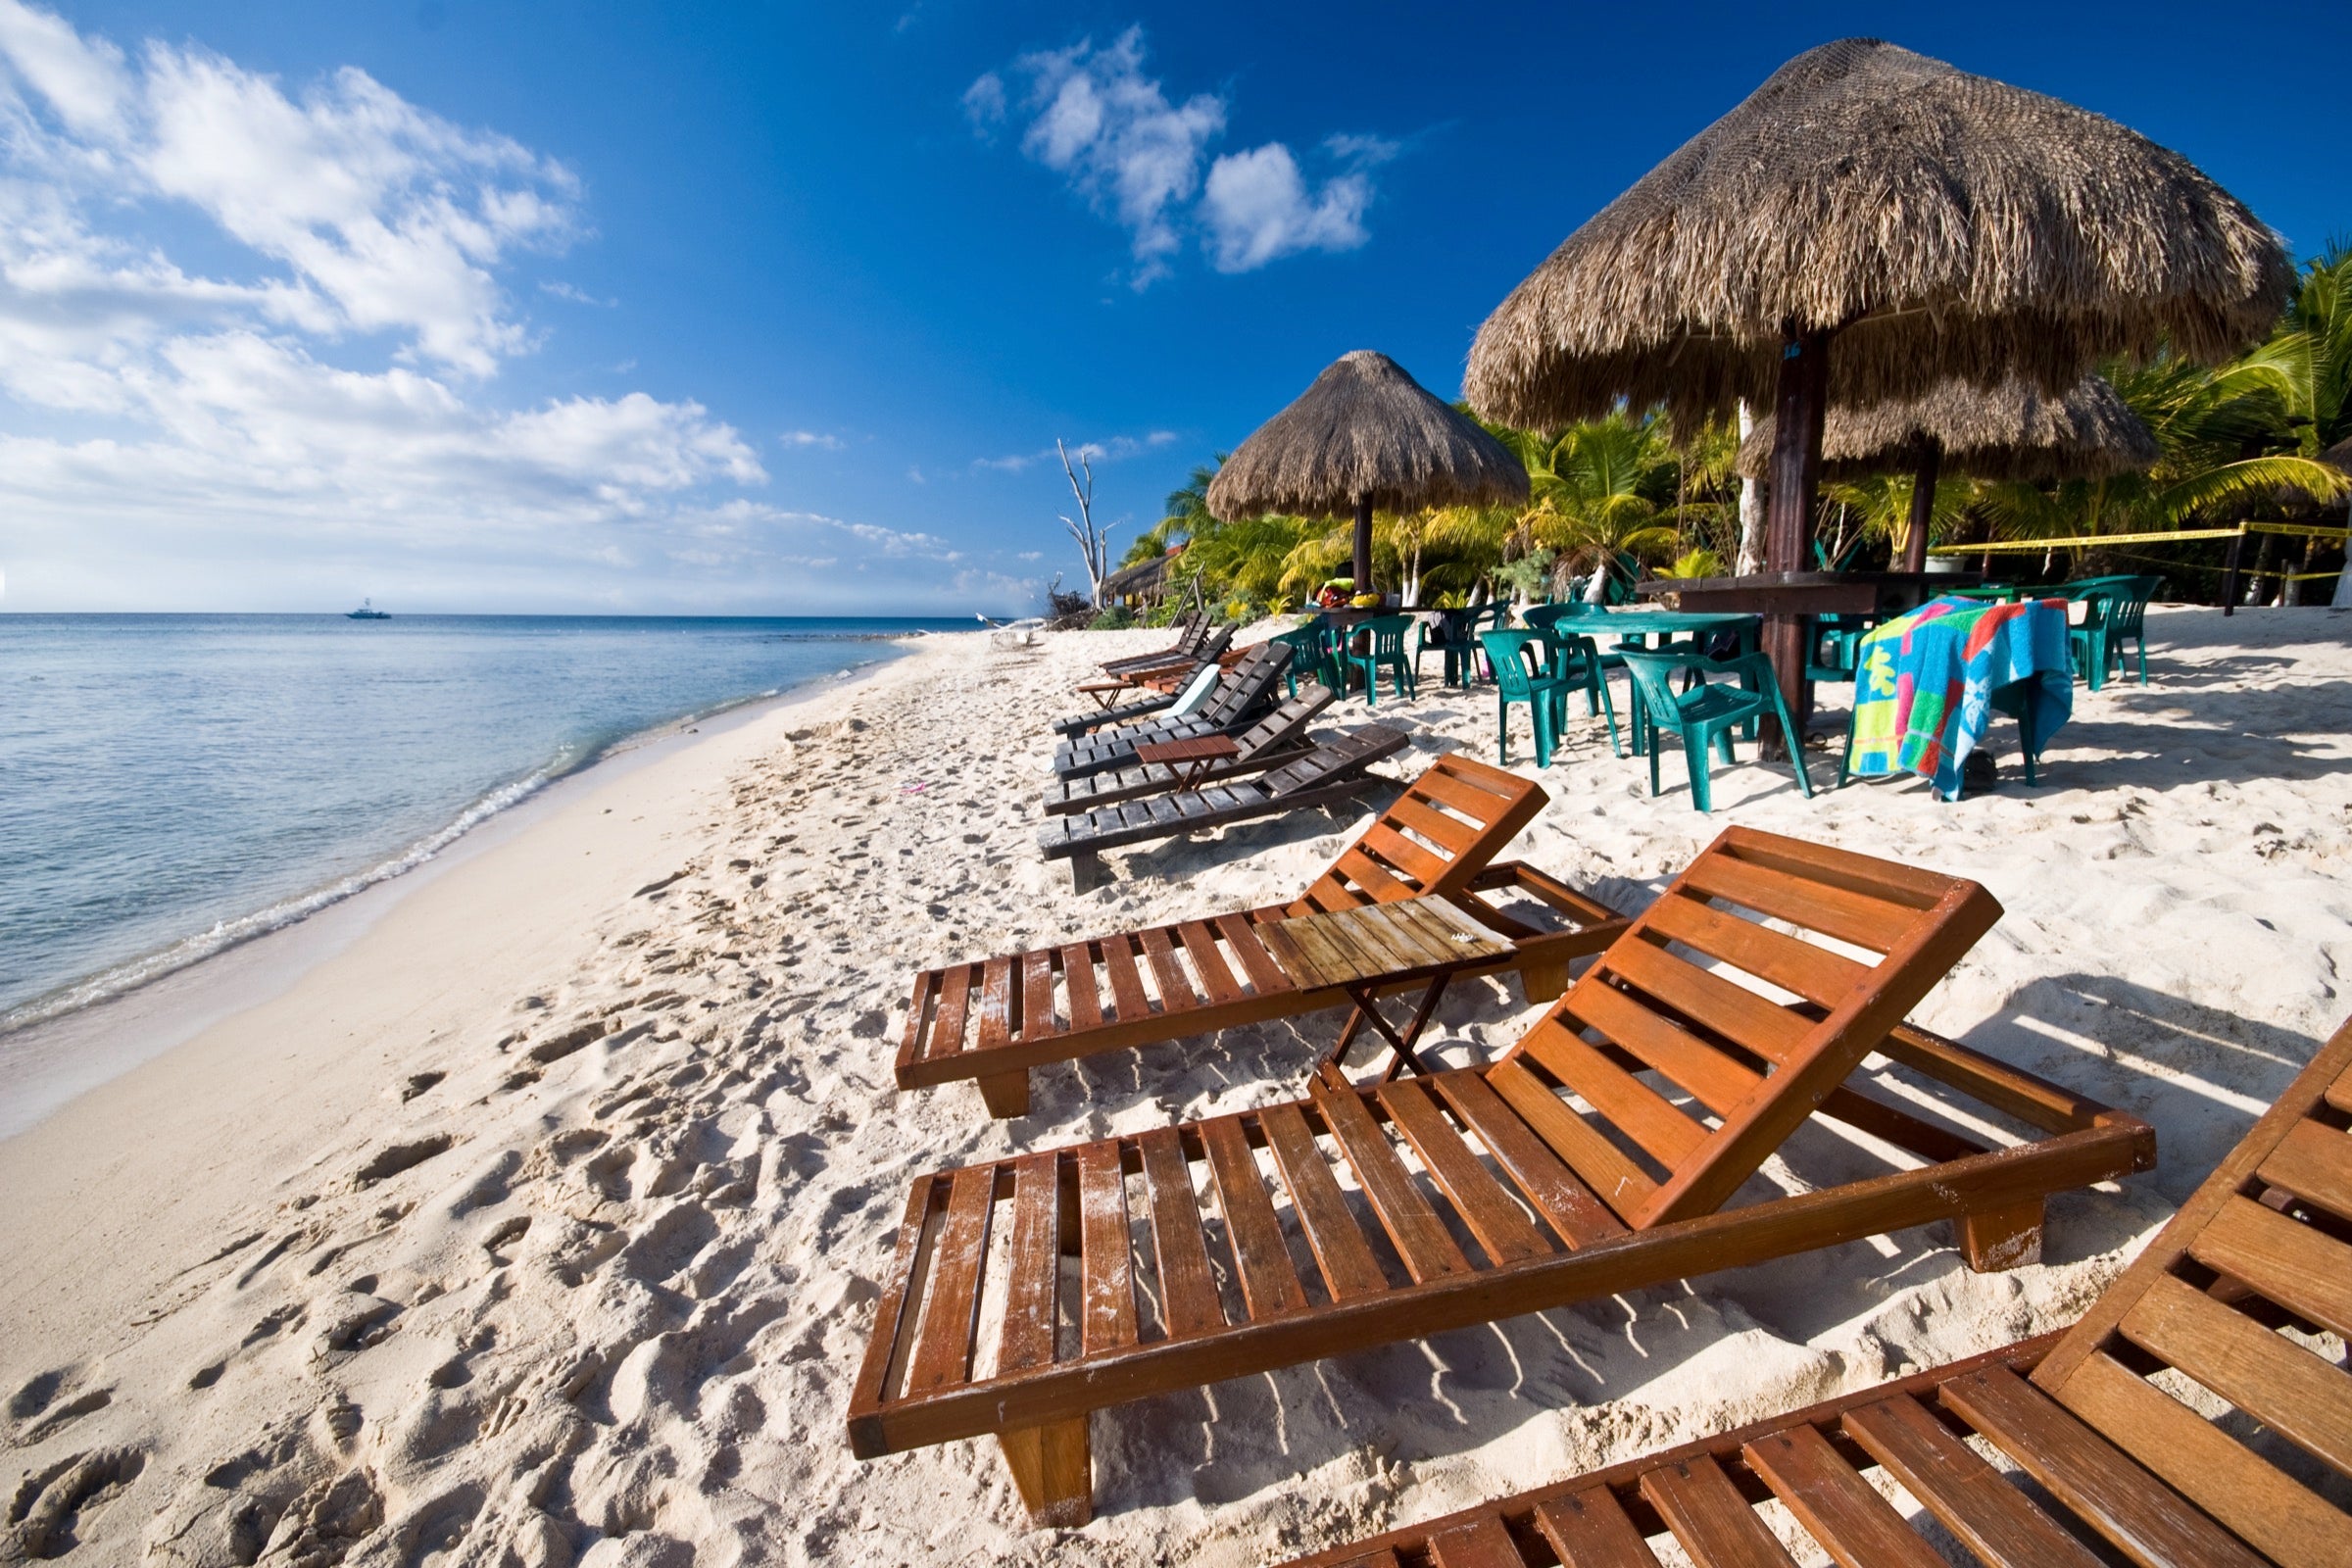 Chairs on the beach in Cozumel Mexico